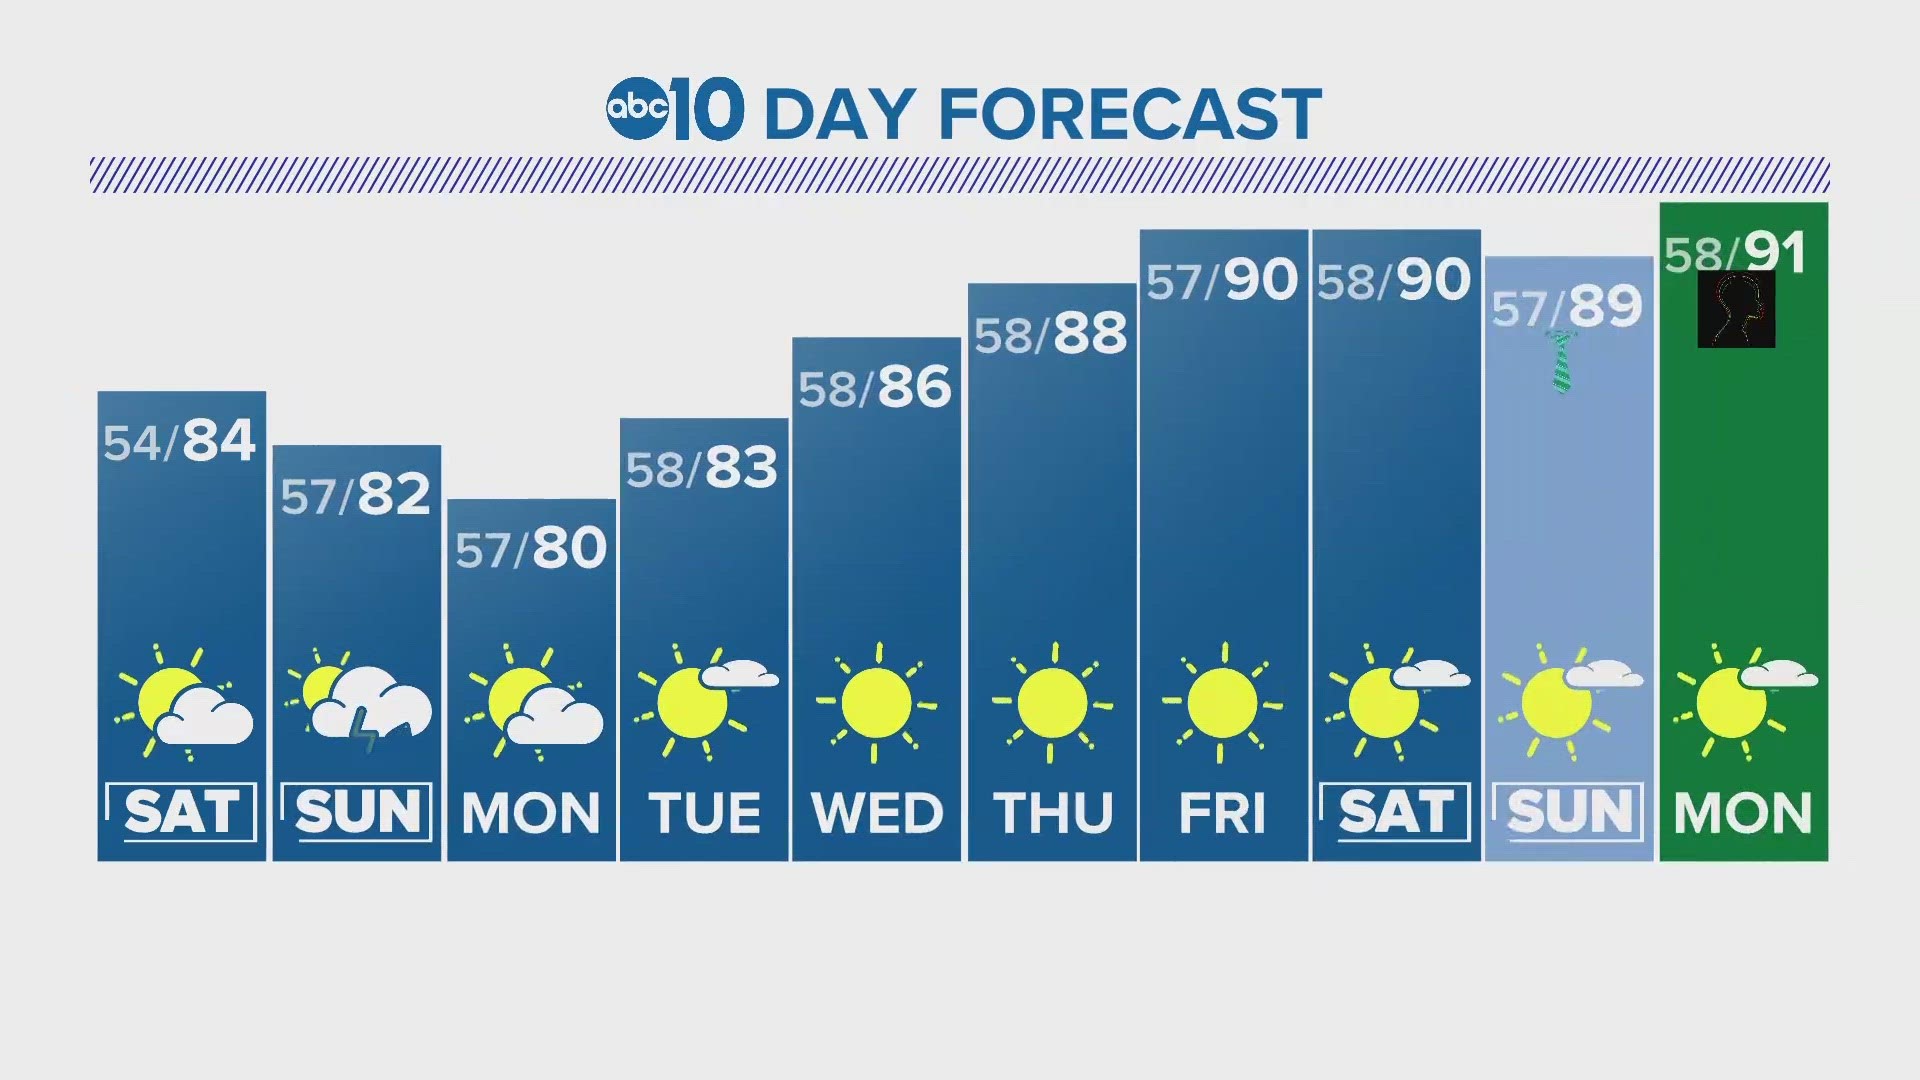 ABC10's Monica Woods gives us a look at our 10-day forecast.